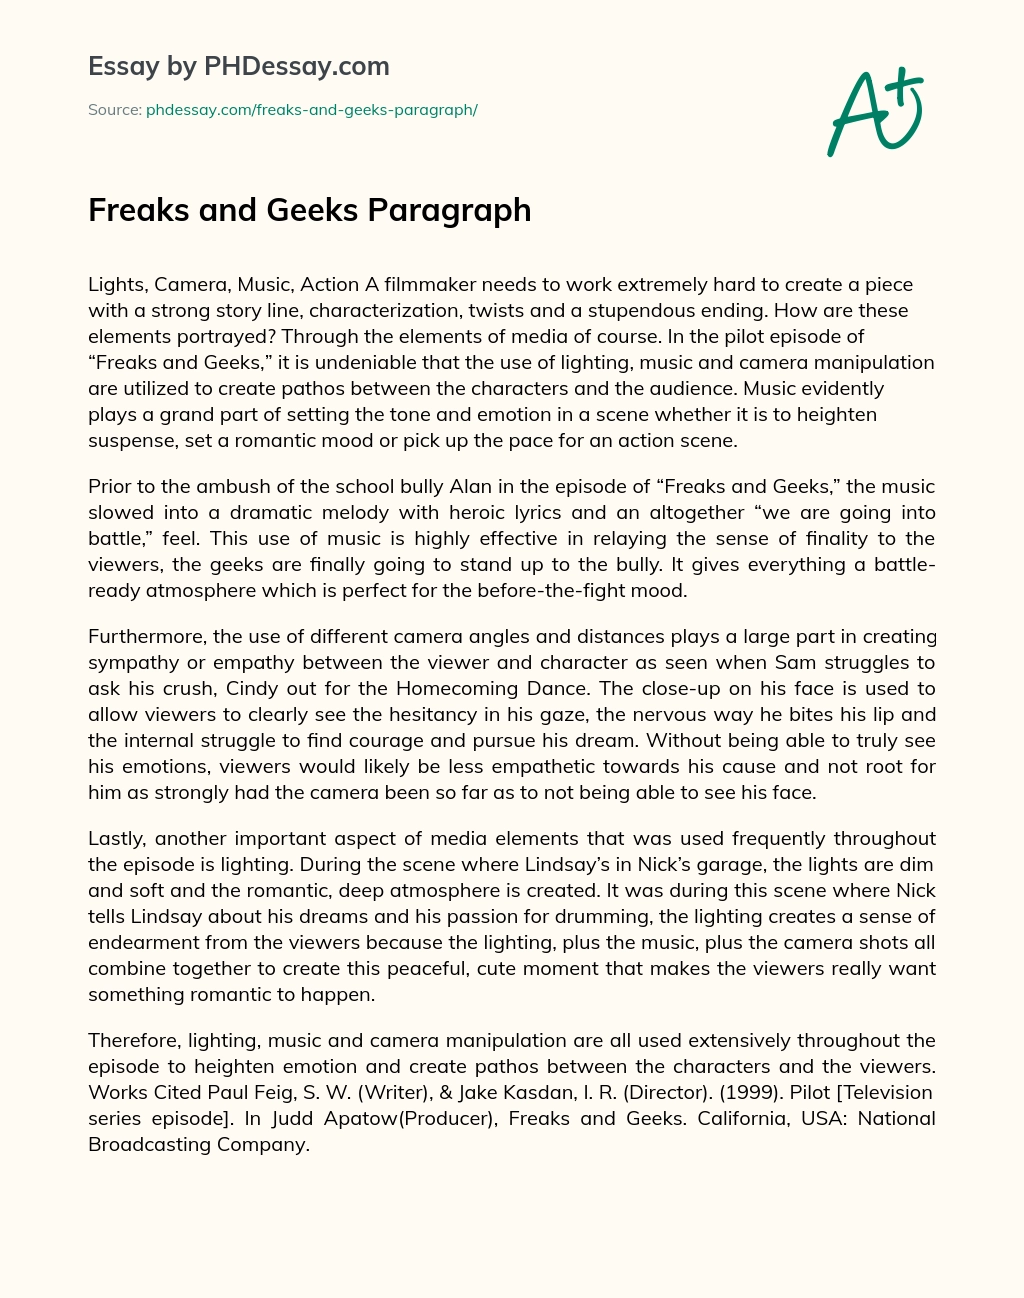 Freaks and Geeks Paragraph essay